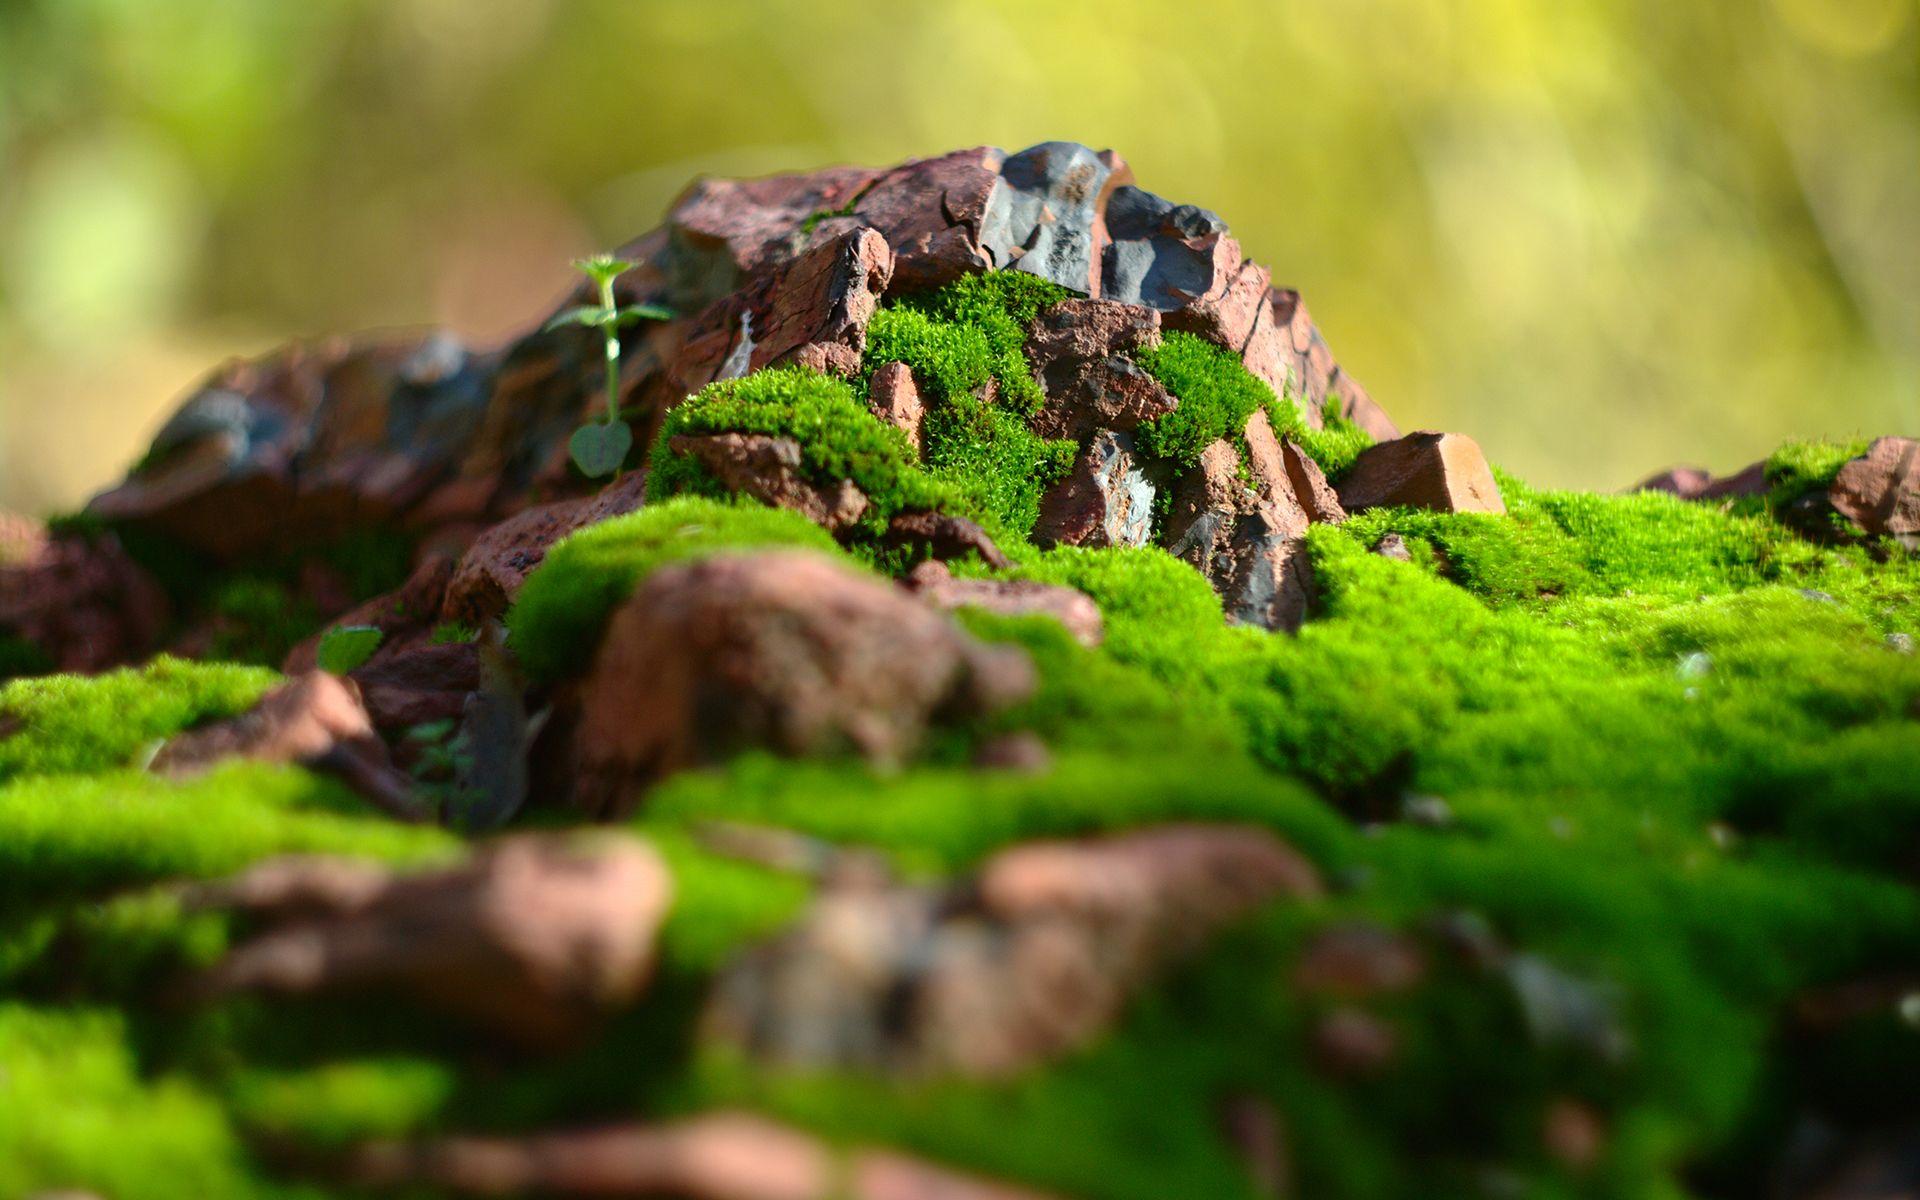 VYW518: Moss Wallpaper, Moss Background In High Quality, GG.YAN